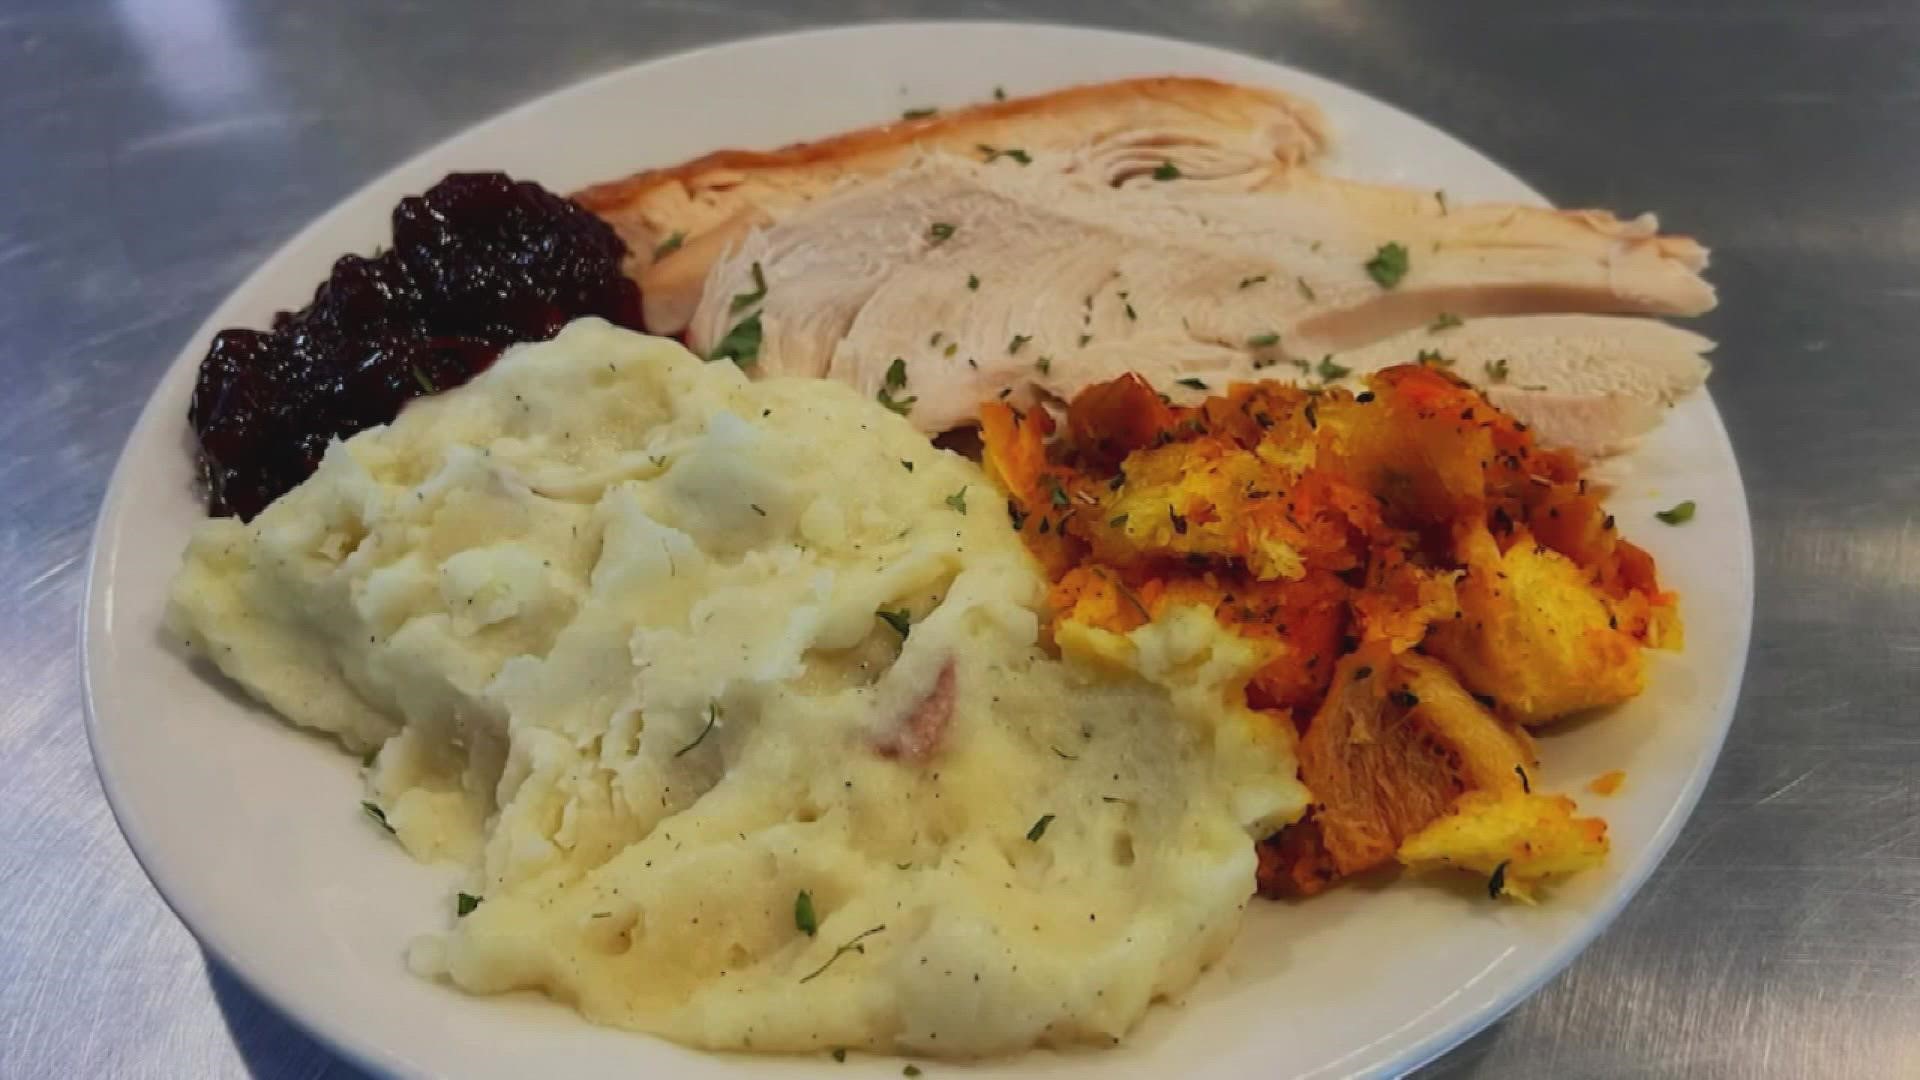 Get ready to pay a little extra this season. The UT Institute for Agriculture said some traditional Thanksgiving items are seeing price hikes this year.